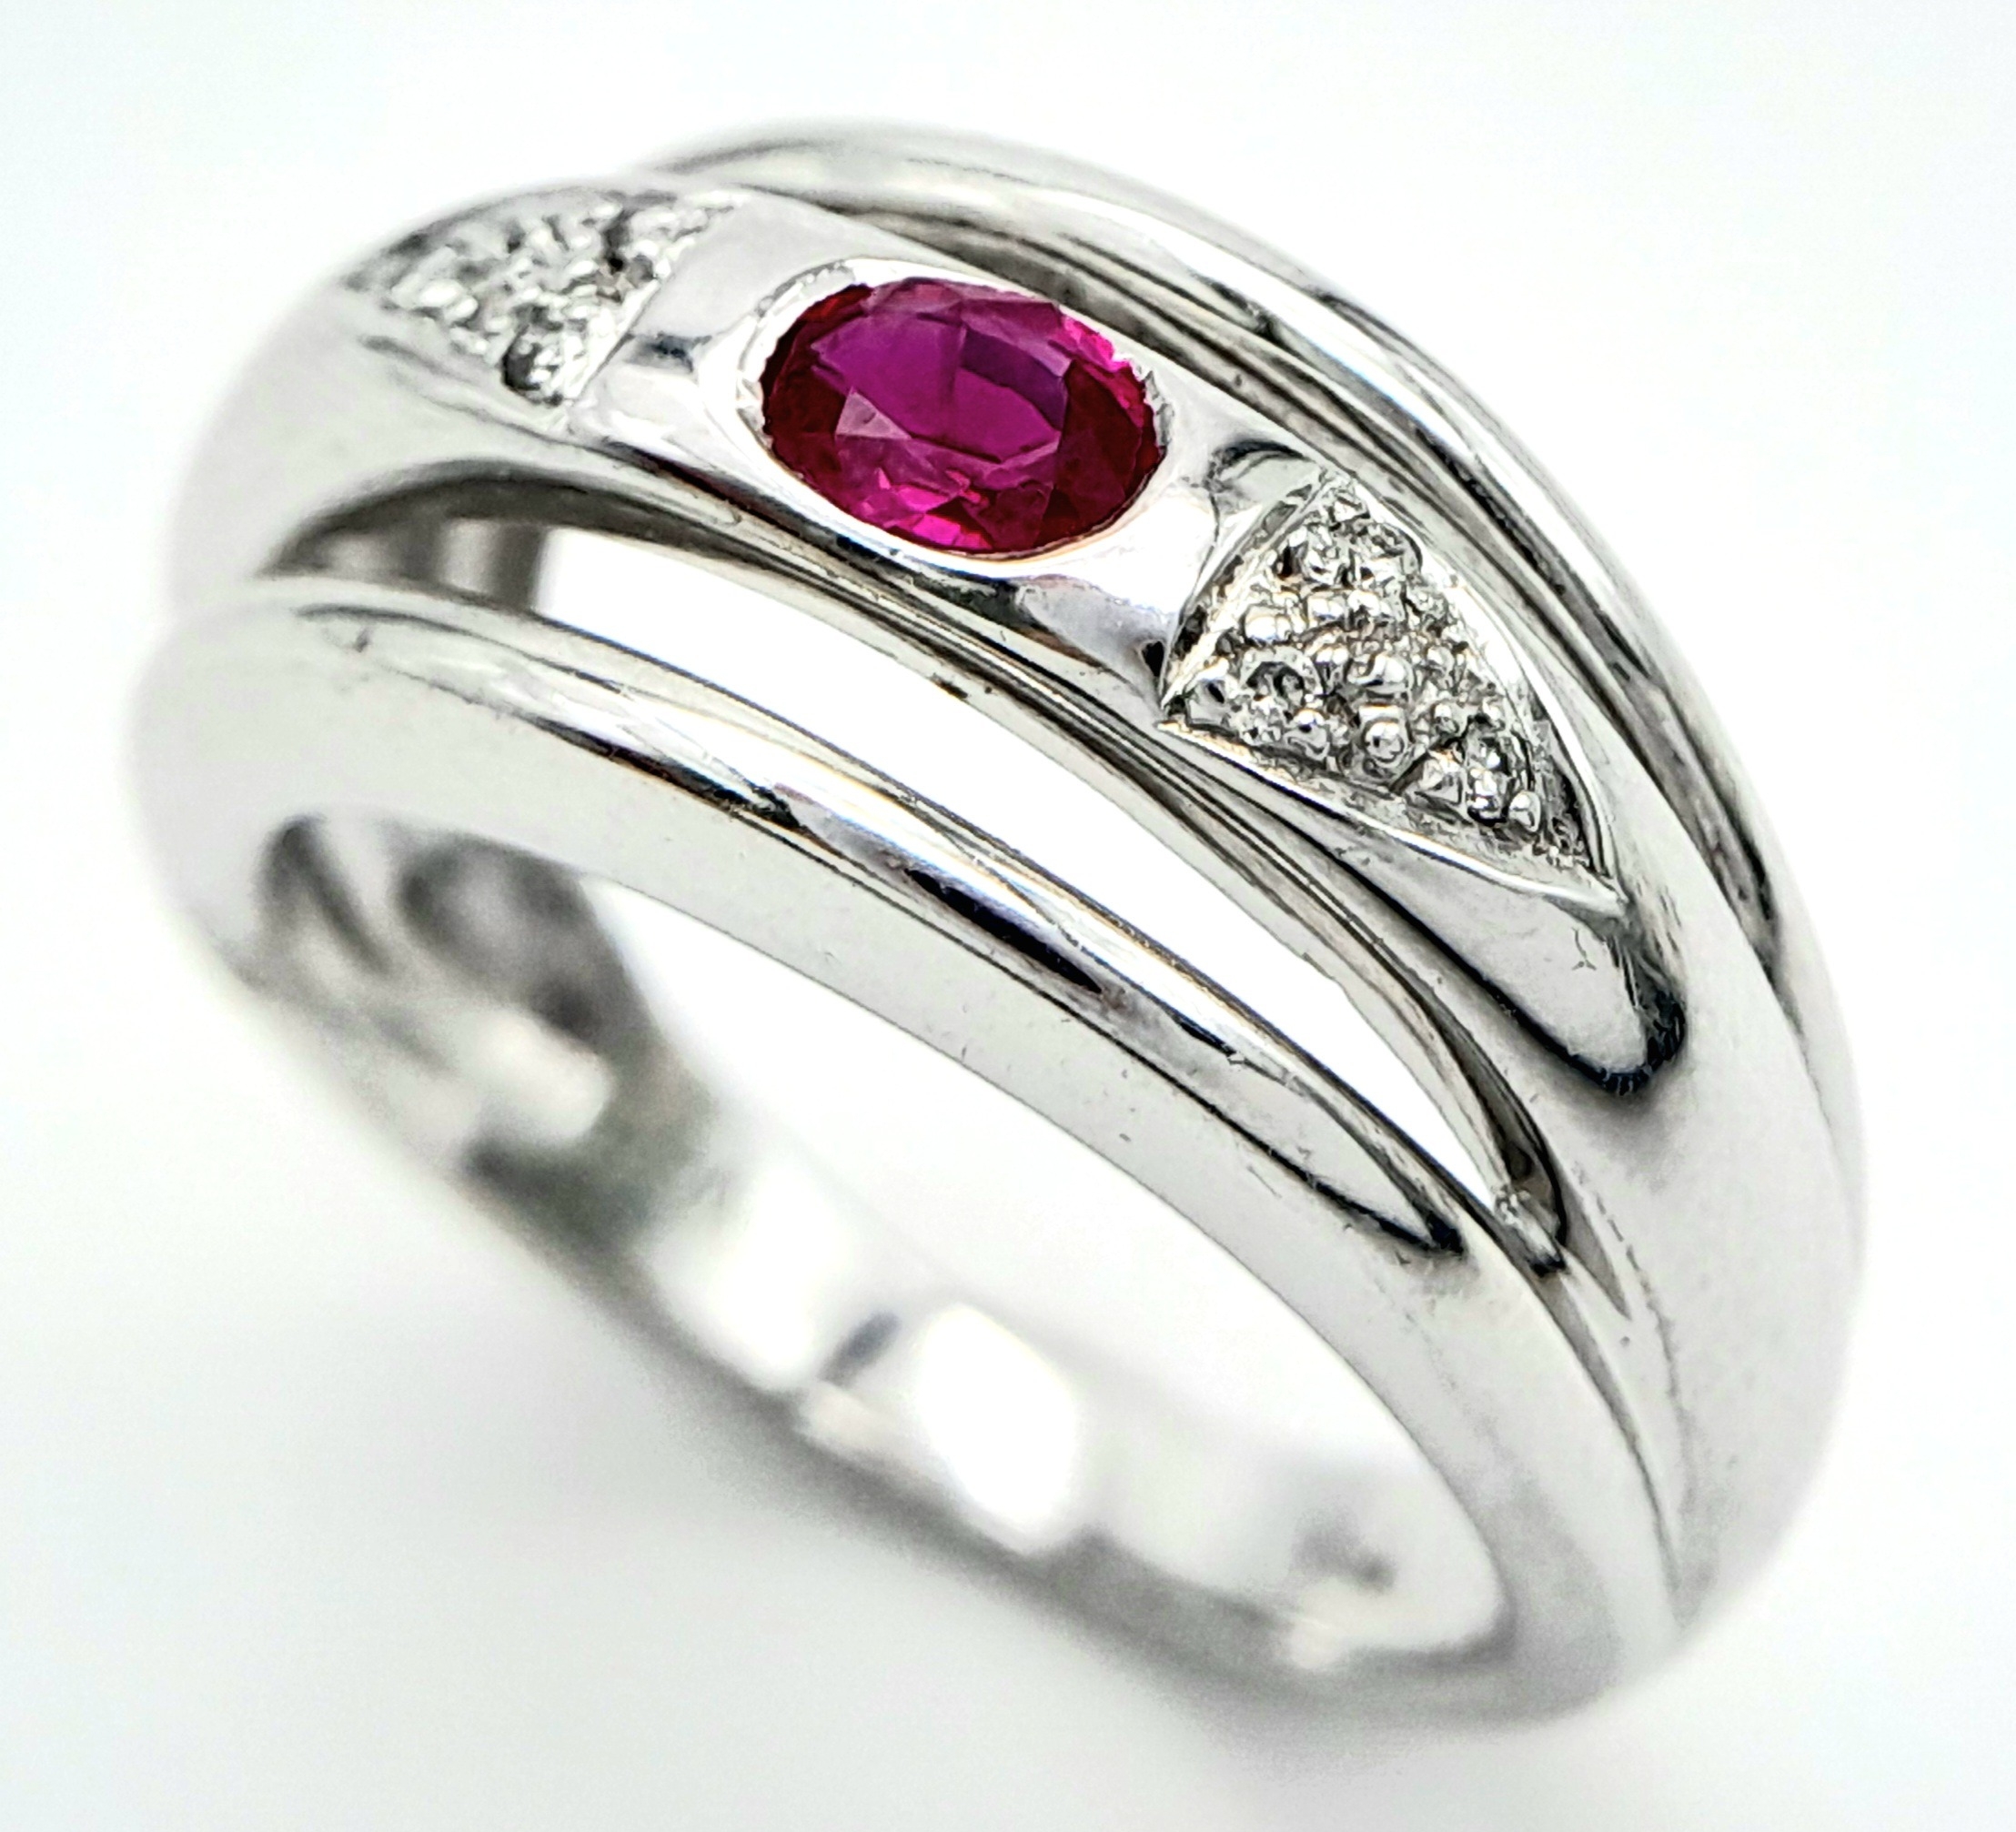 AN 18K WHITE GOLD DIAMOND & RUBY RING. Size N, 6.6g total weight. Ref: SC 8068 - Image 3 of 8